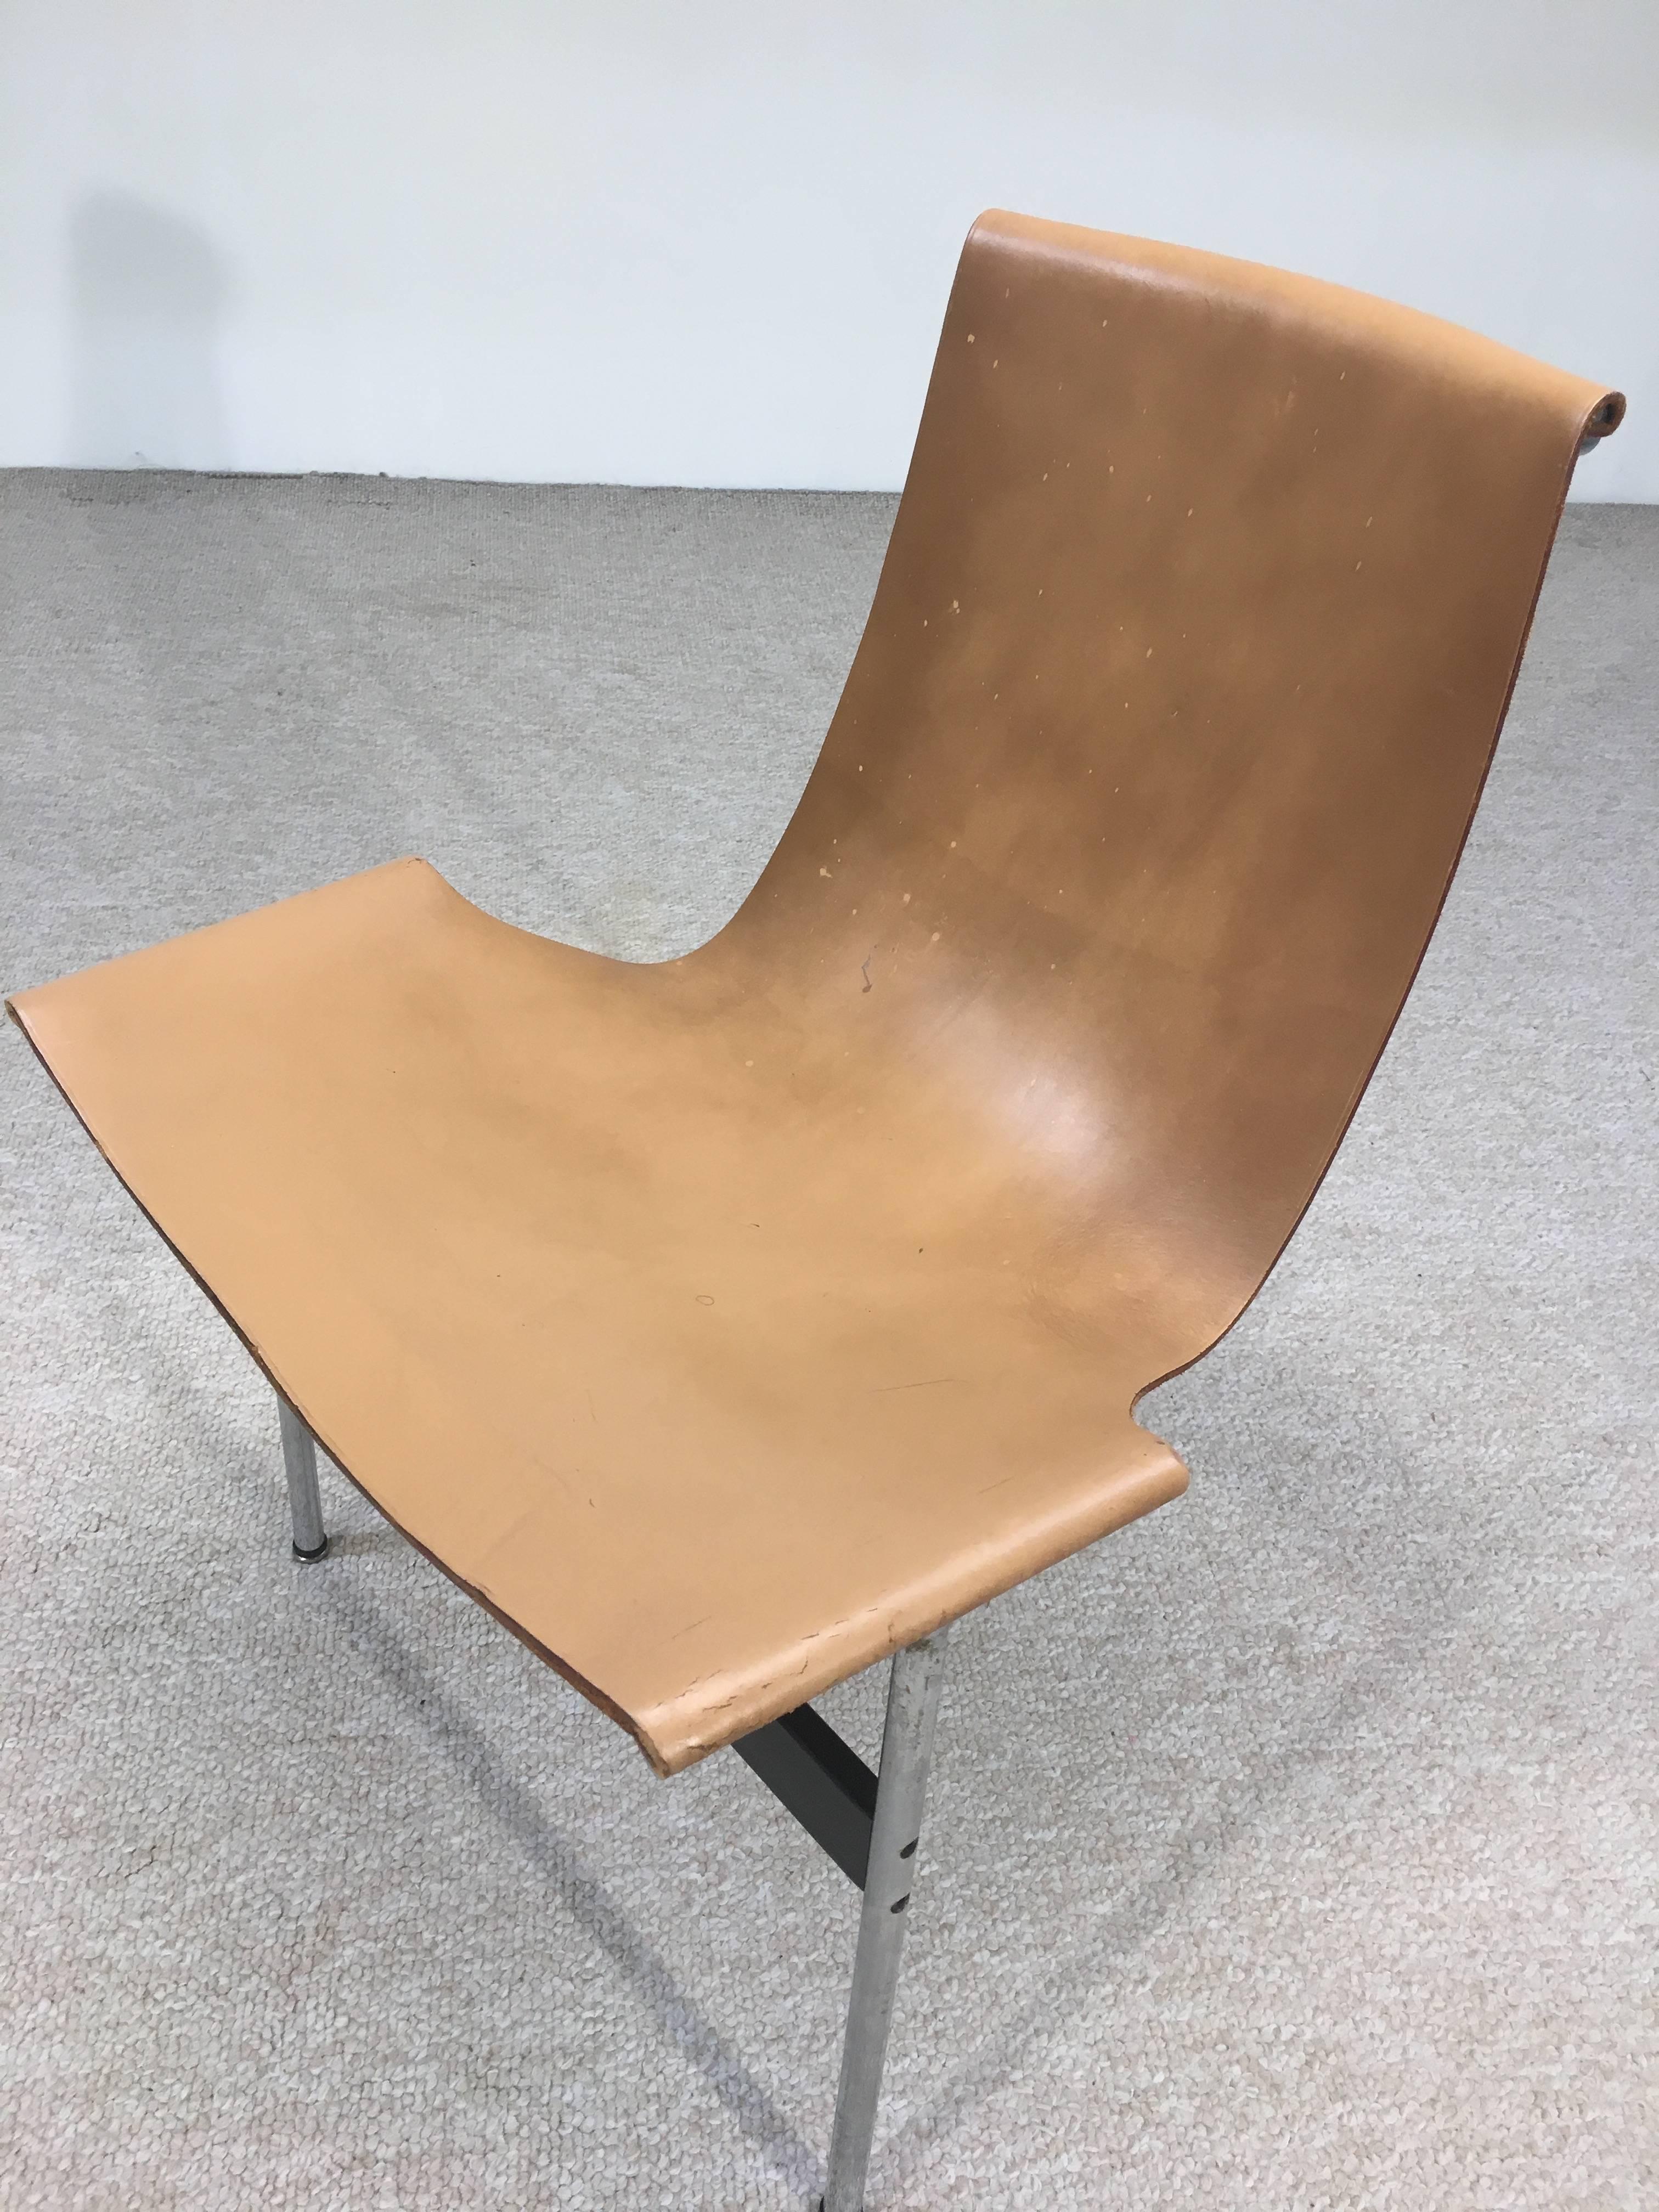 This particular example belonged to 1970s portrait painter Sandra Blumberg. Mick Jagger, Elton John, Mohammad Ali and countless other legends have sat in it to pose.
Leather sling, solid steel T-frame with chromed steel legs.